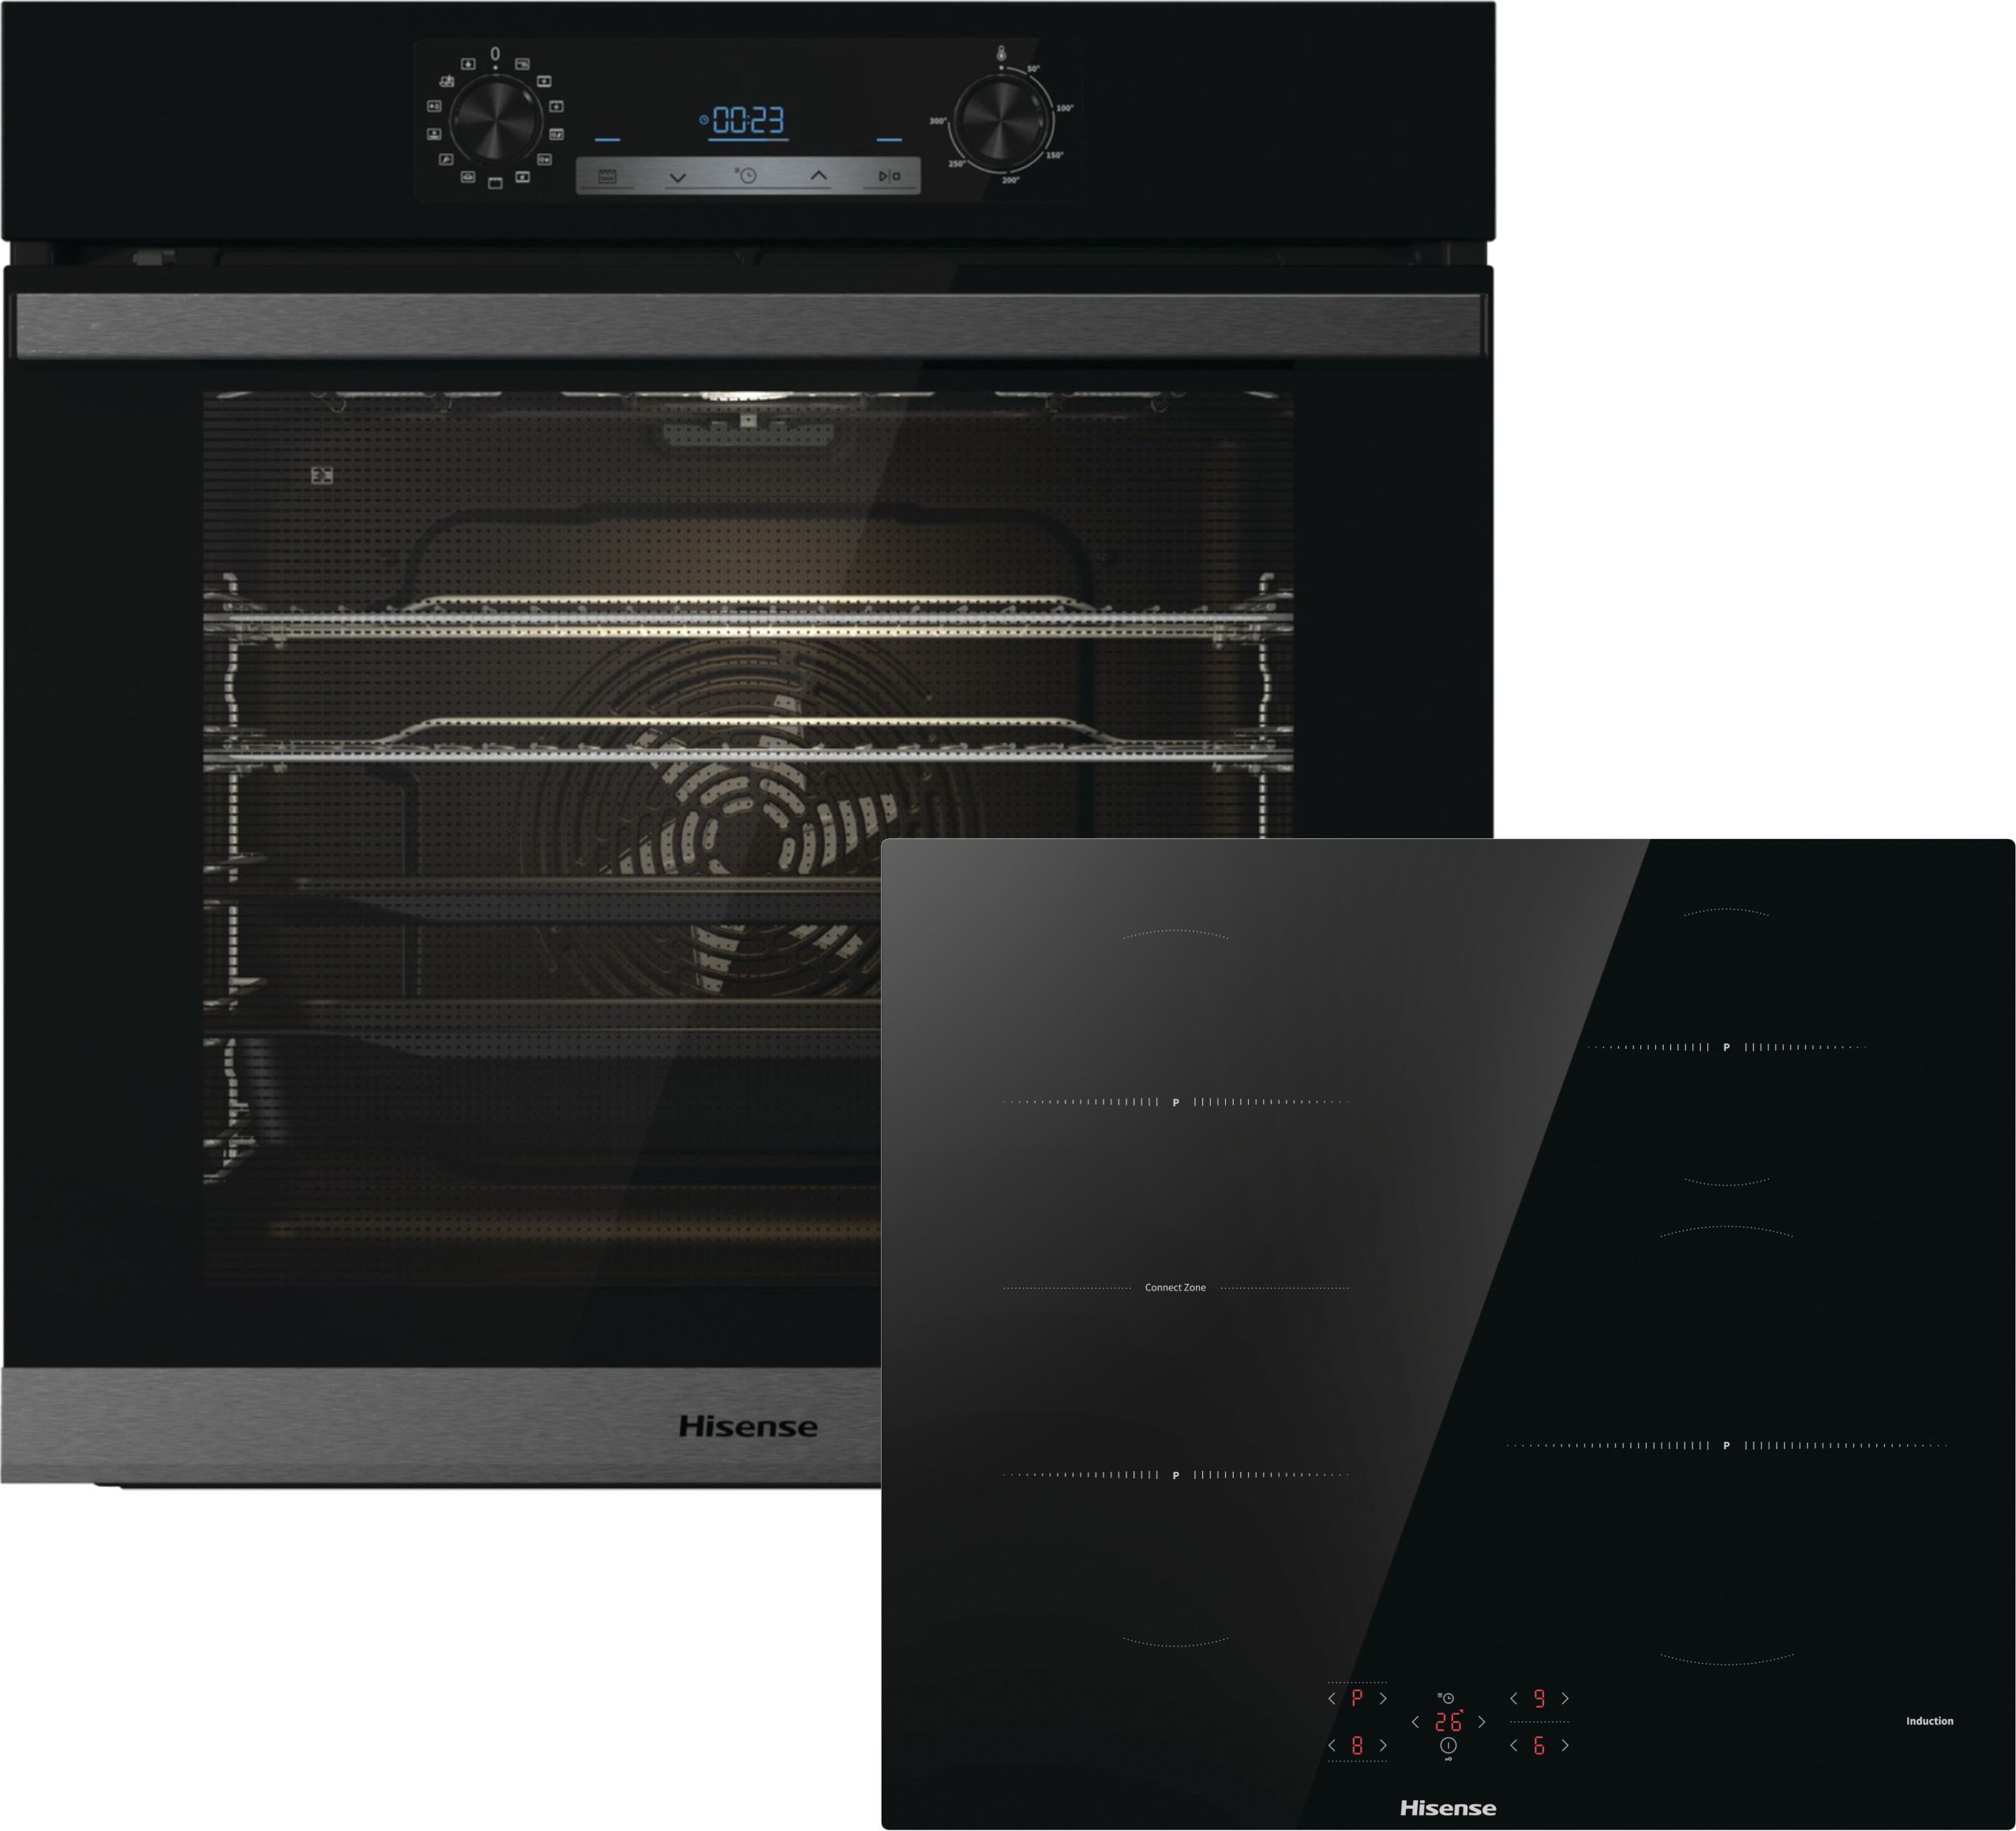 Hisense BI60651HIBUK Built In Electric Single Oven and Induction Hob Pack - Black - A+ Rated, Black